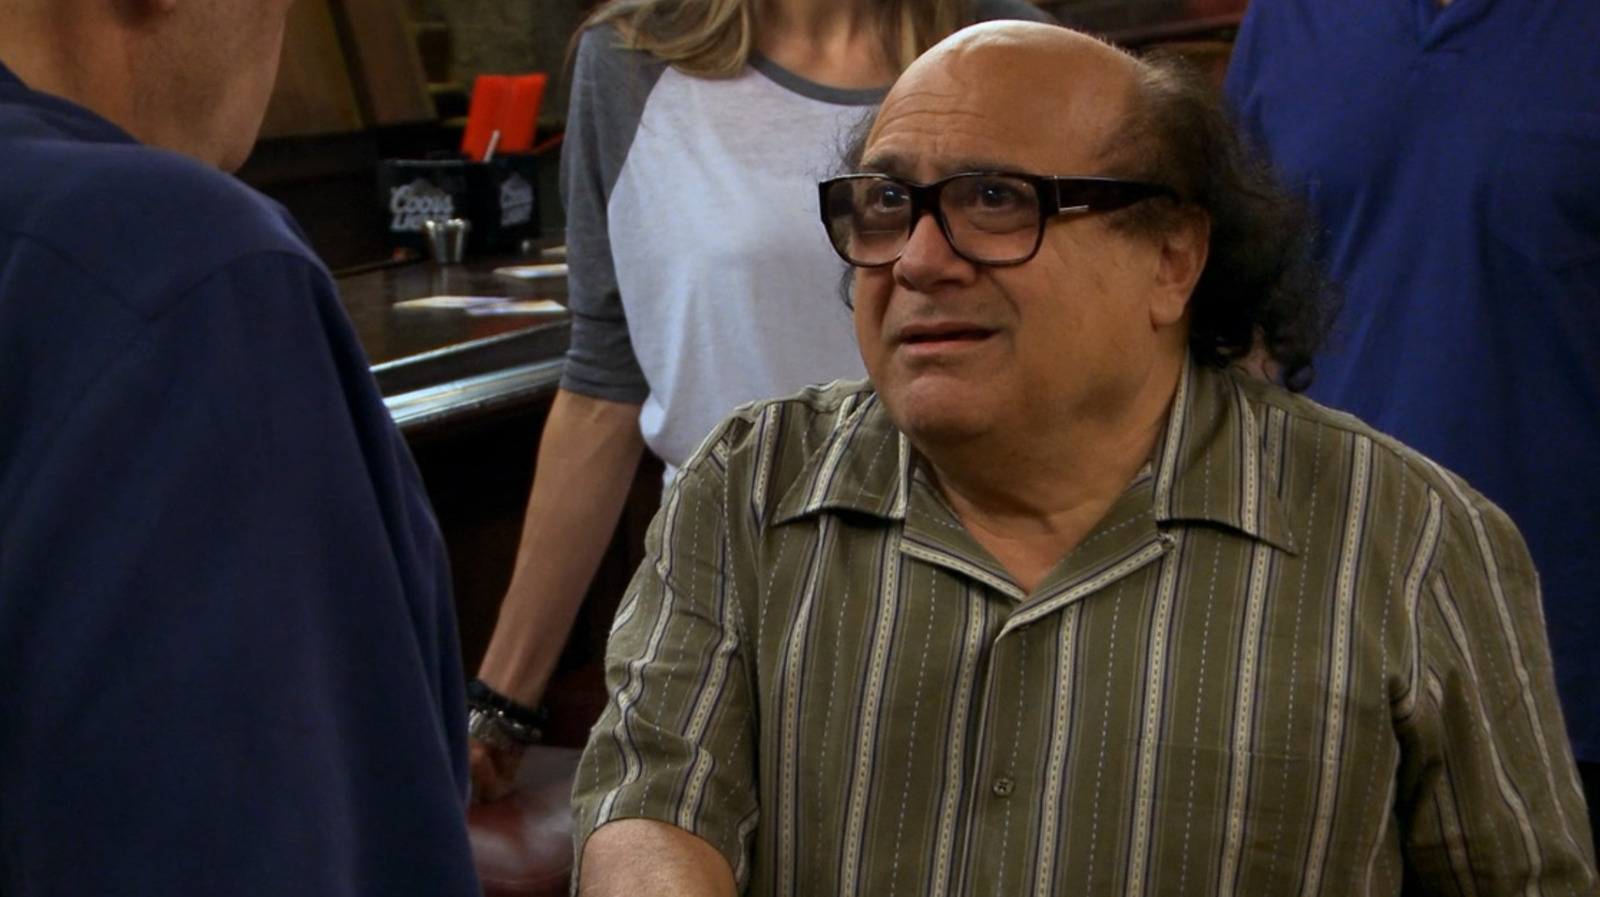 The Season 7 Episode Of It's Always Sunny That Got A 'Resounding Rejection' From Fans